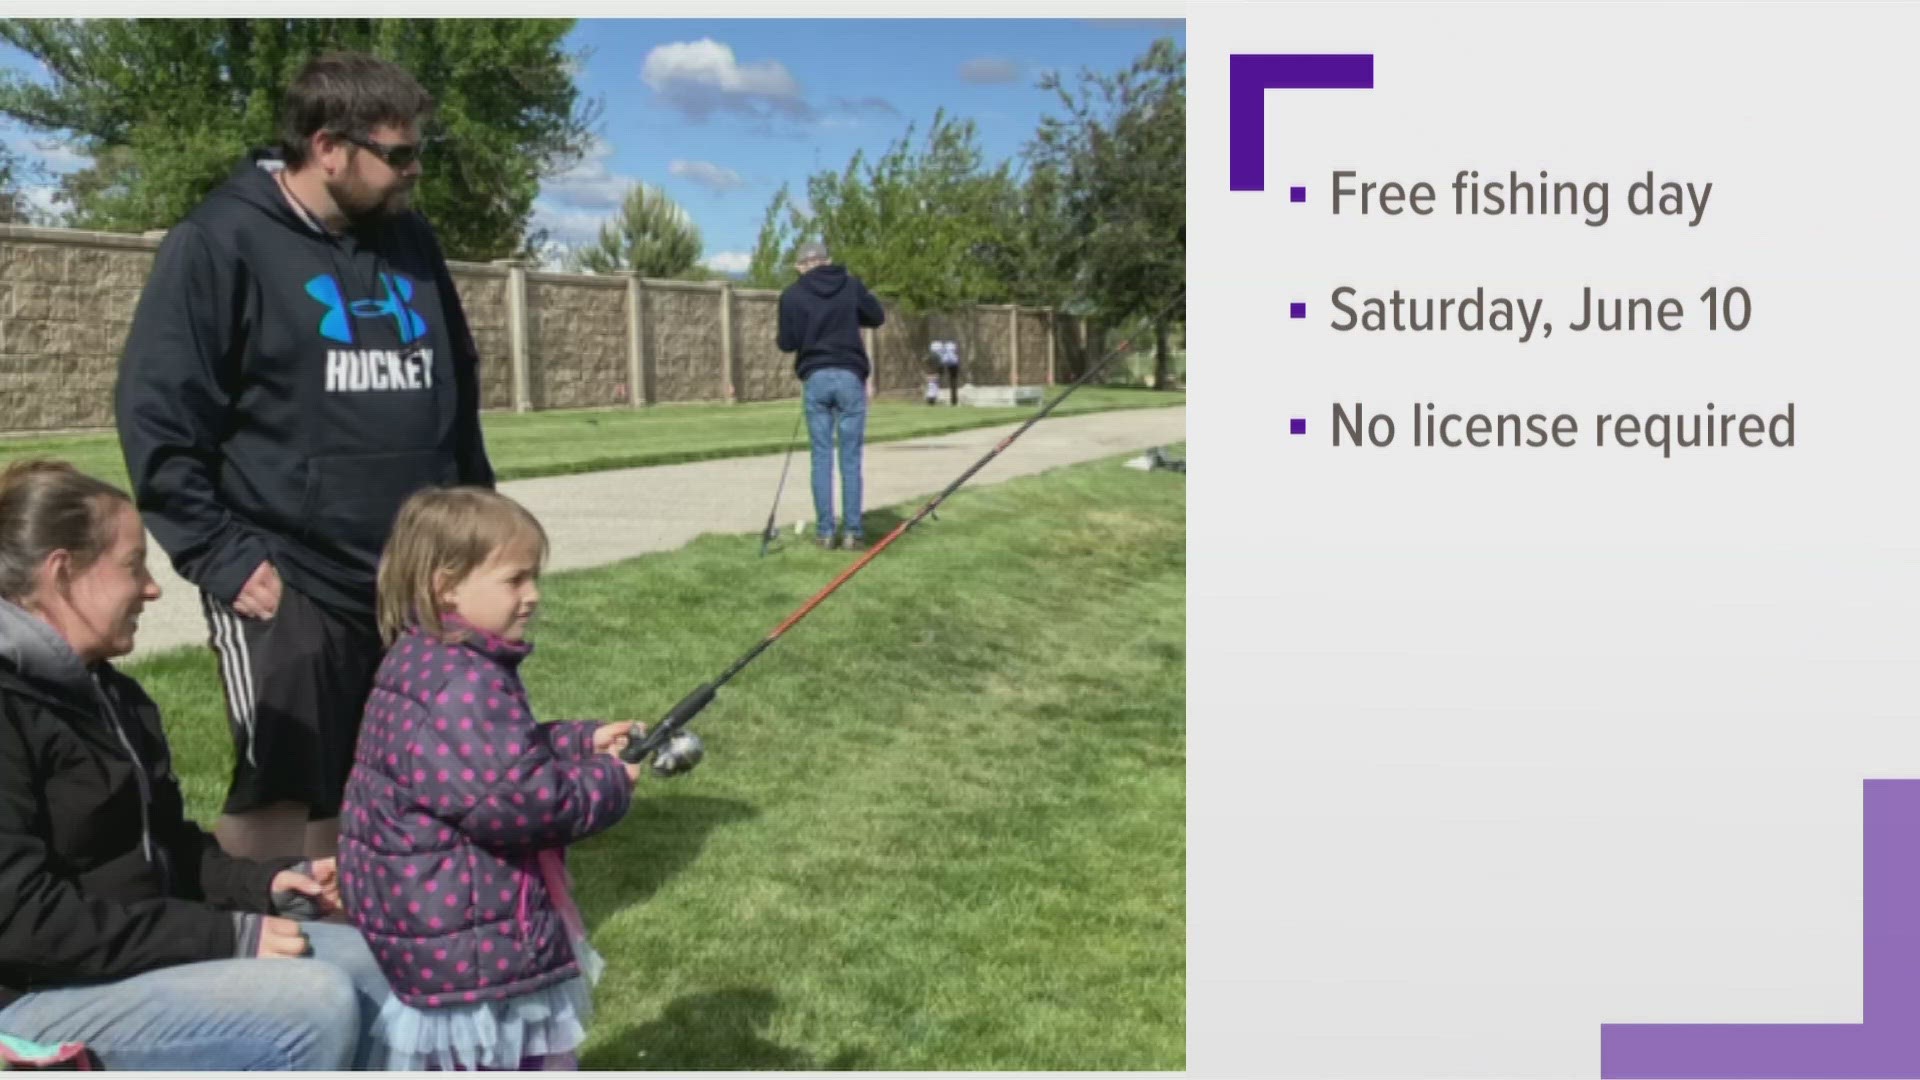 People that are experienced anglers or first-time fishers can experience Free Fishing Day in Idaho on June 10.